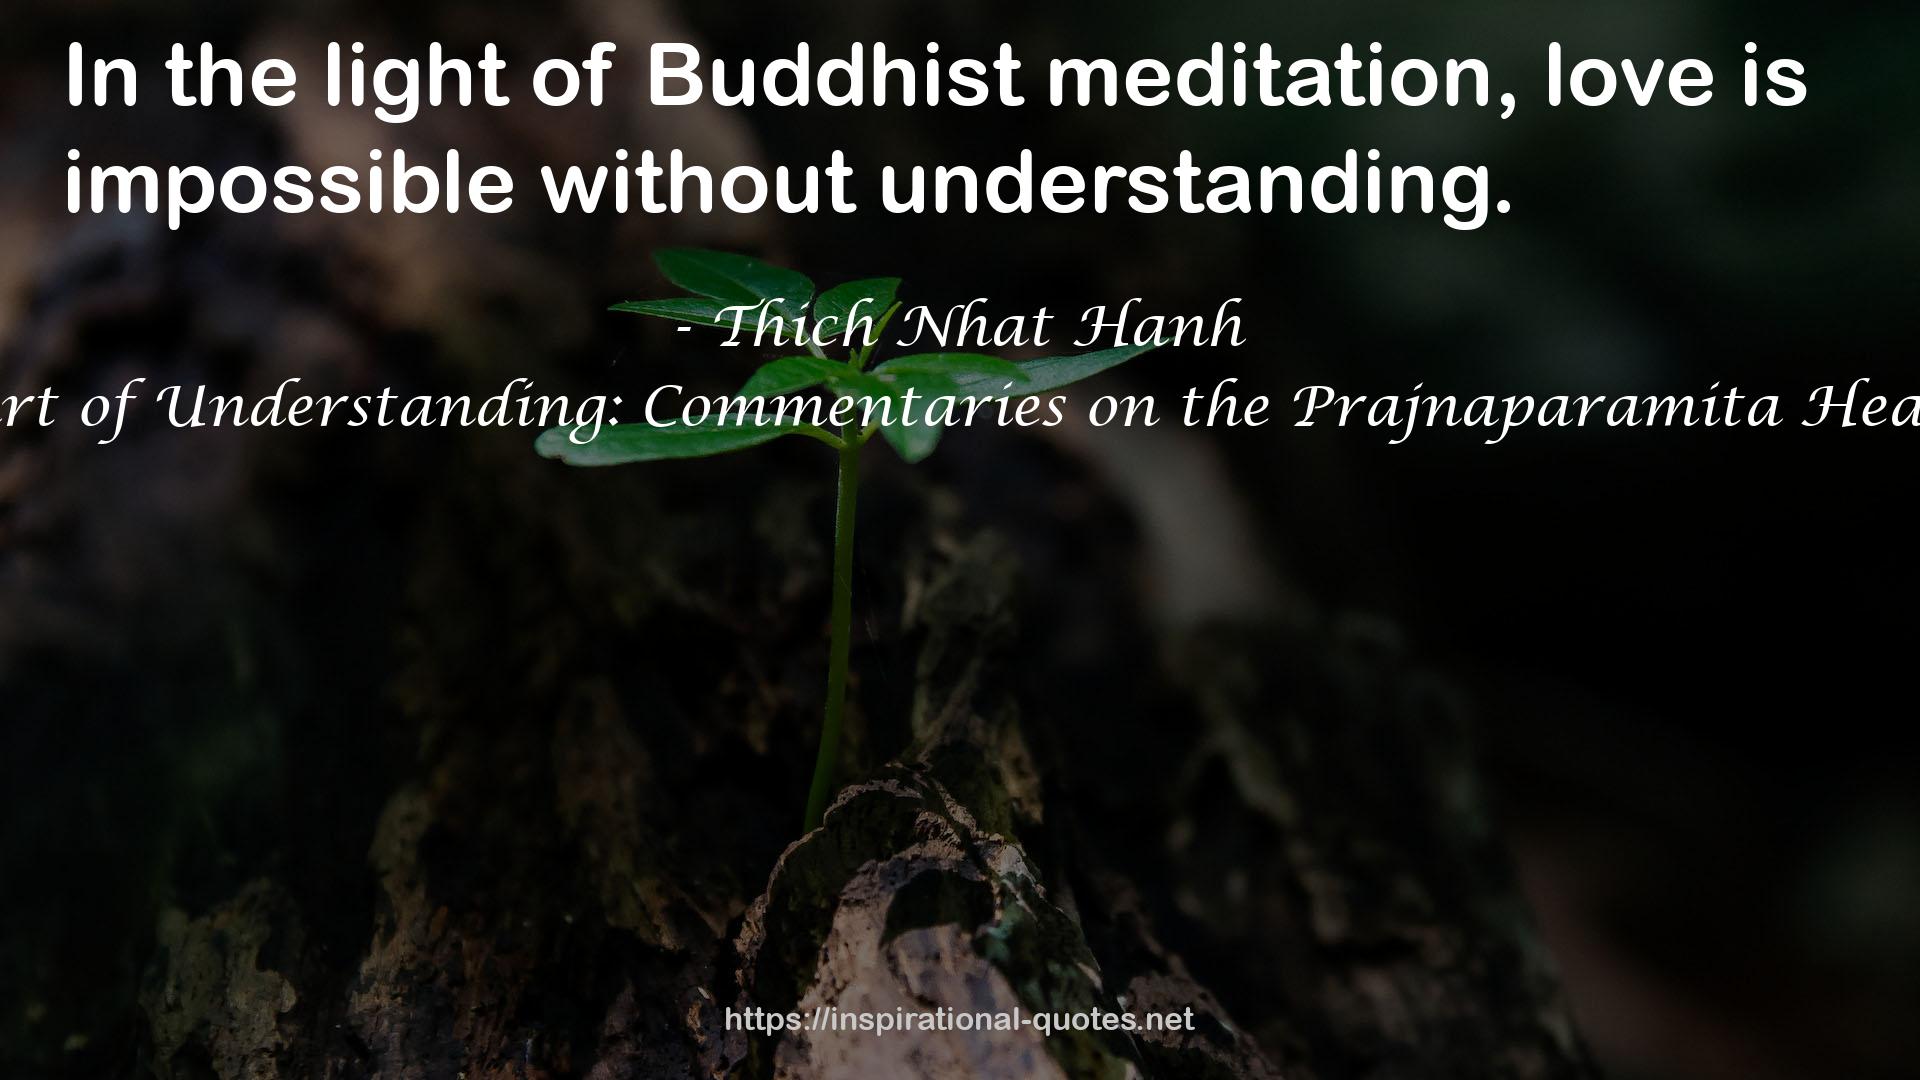 The Heart of Understanding: Commentaries on the Prajnaparamita Heart Sutra QUOTES